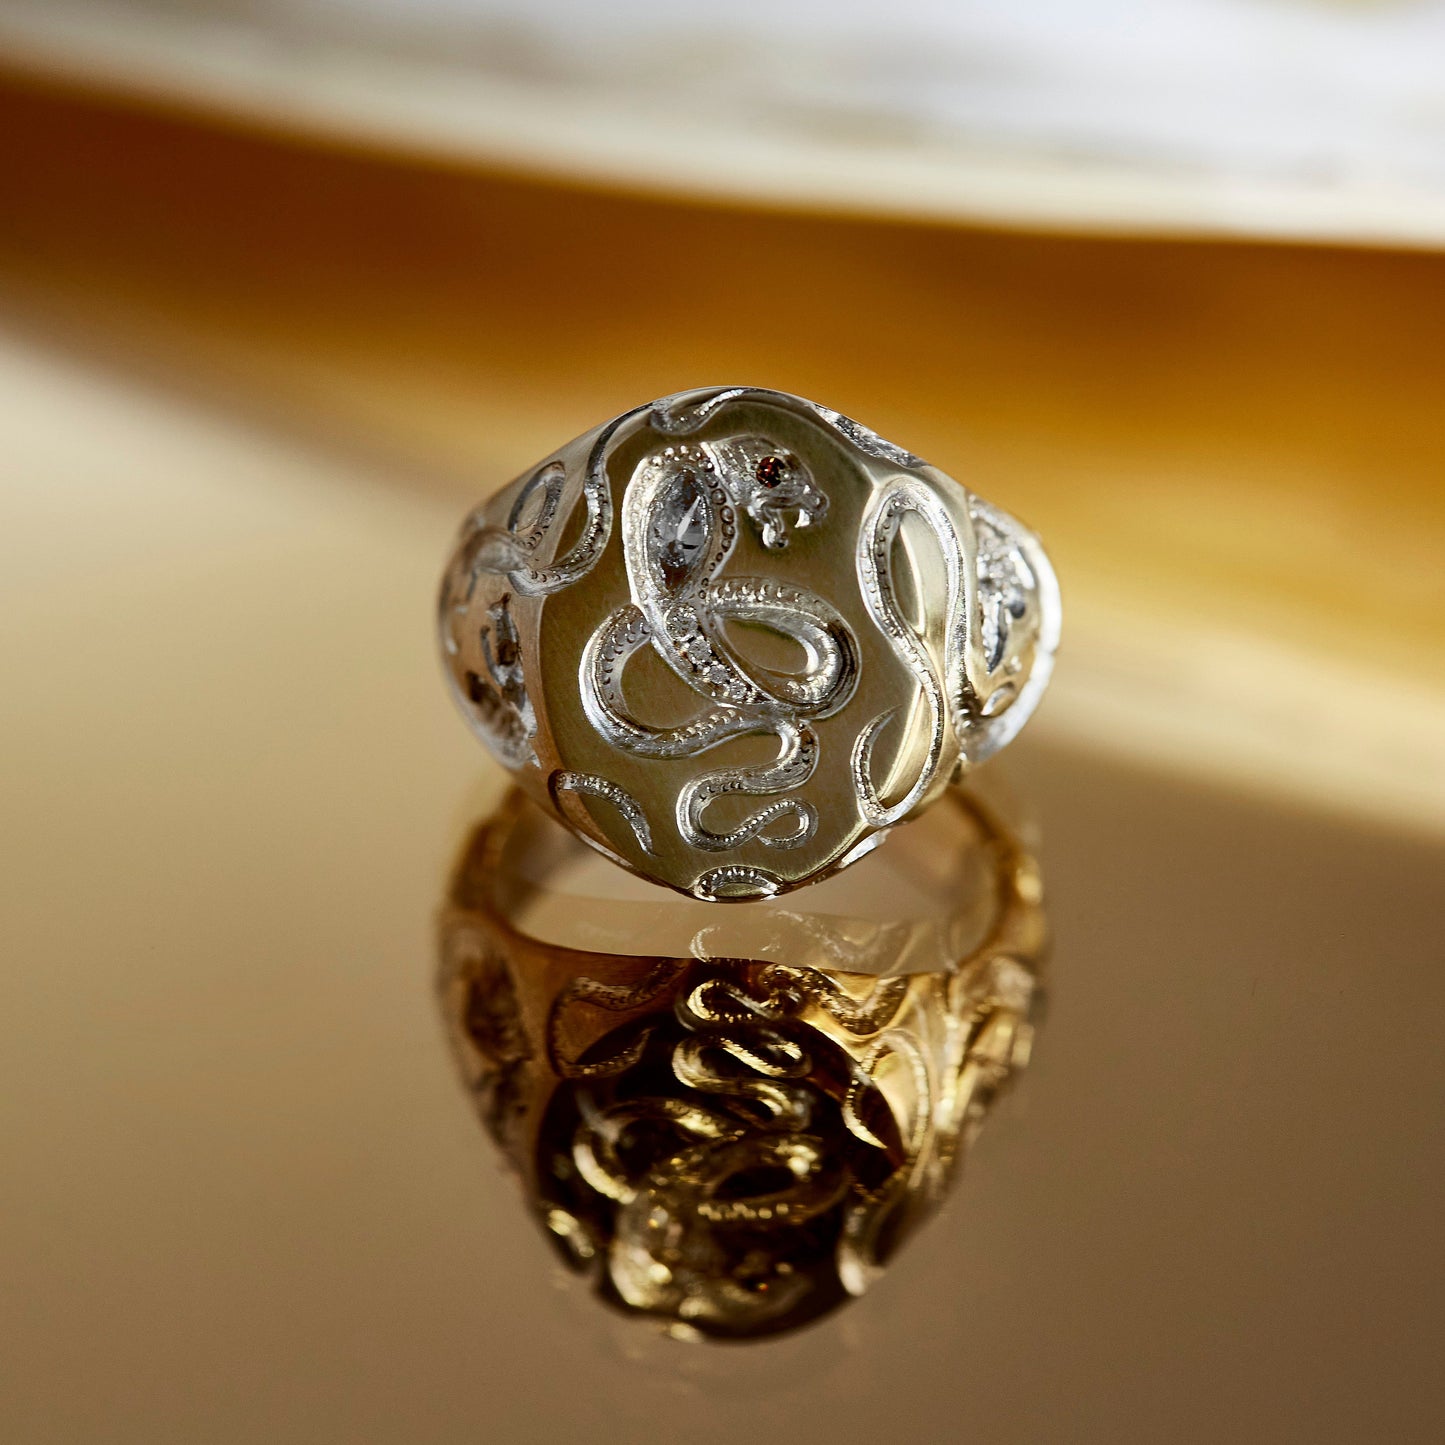 Castro Smith - engraved snake signet ring with silver plating and diamonds